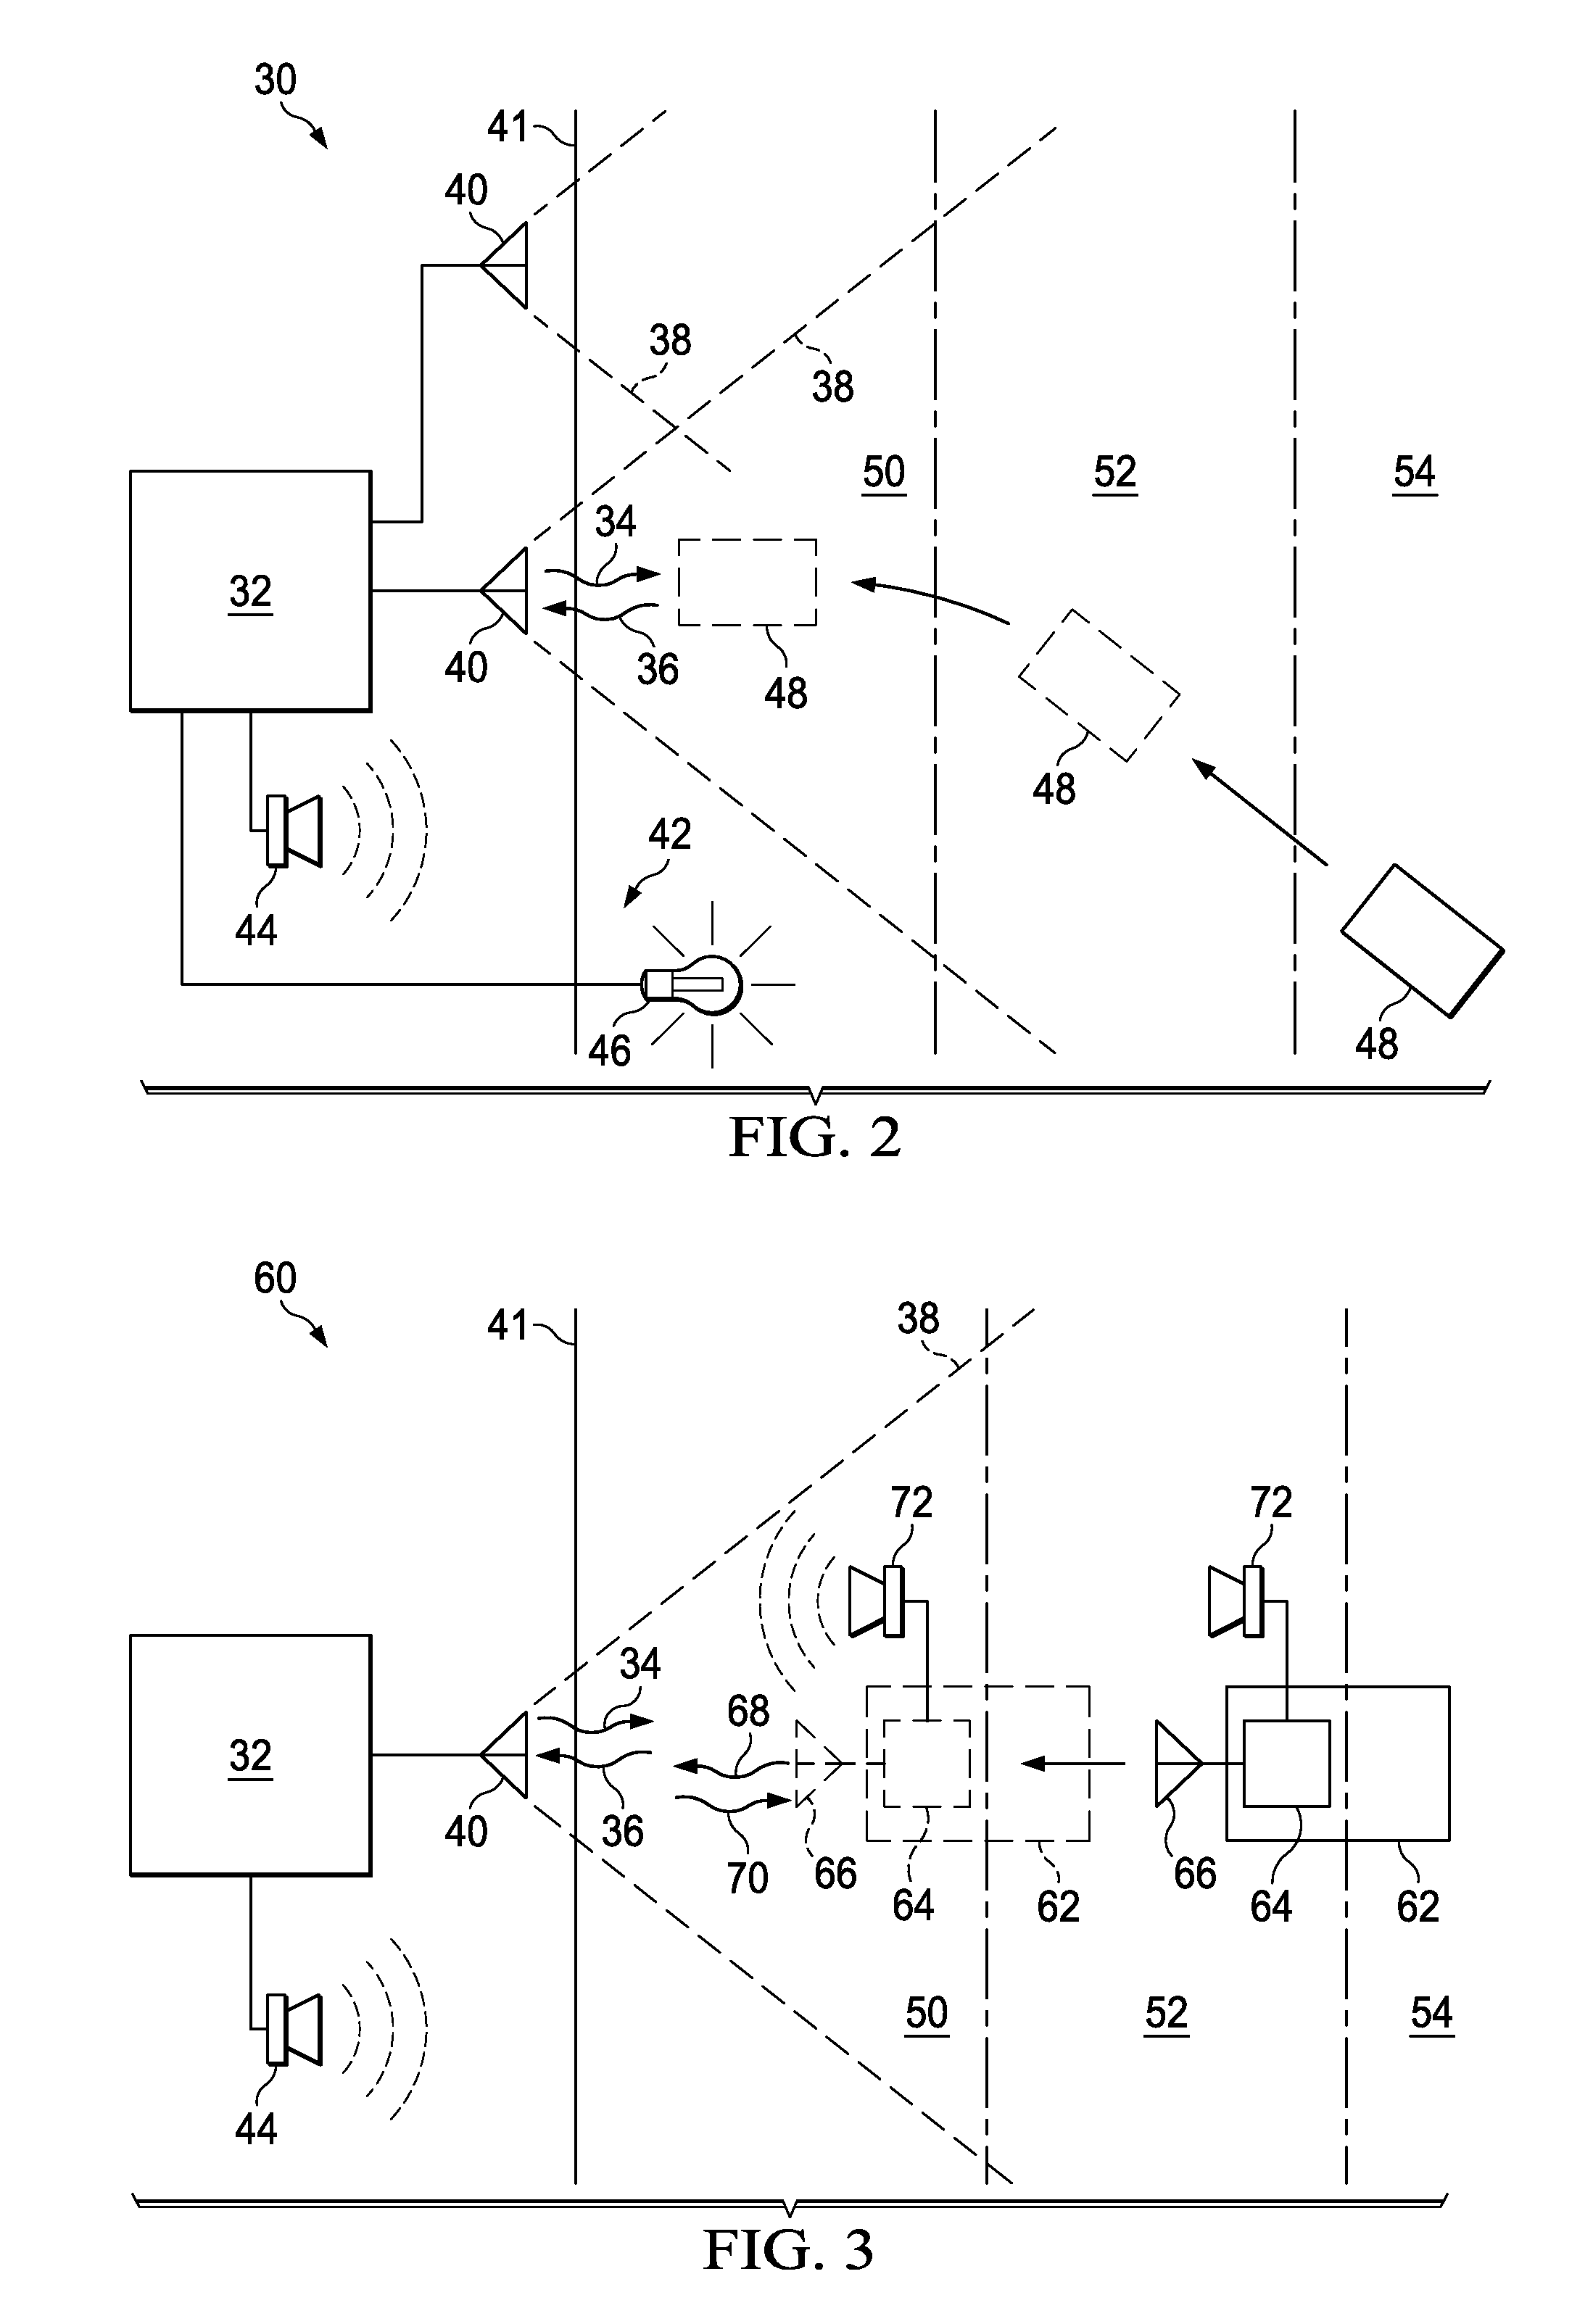 Ground Vehicle Collision Prevention Systems and Methods